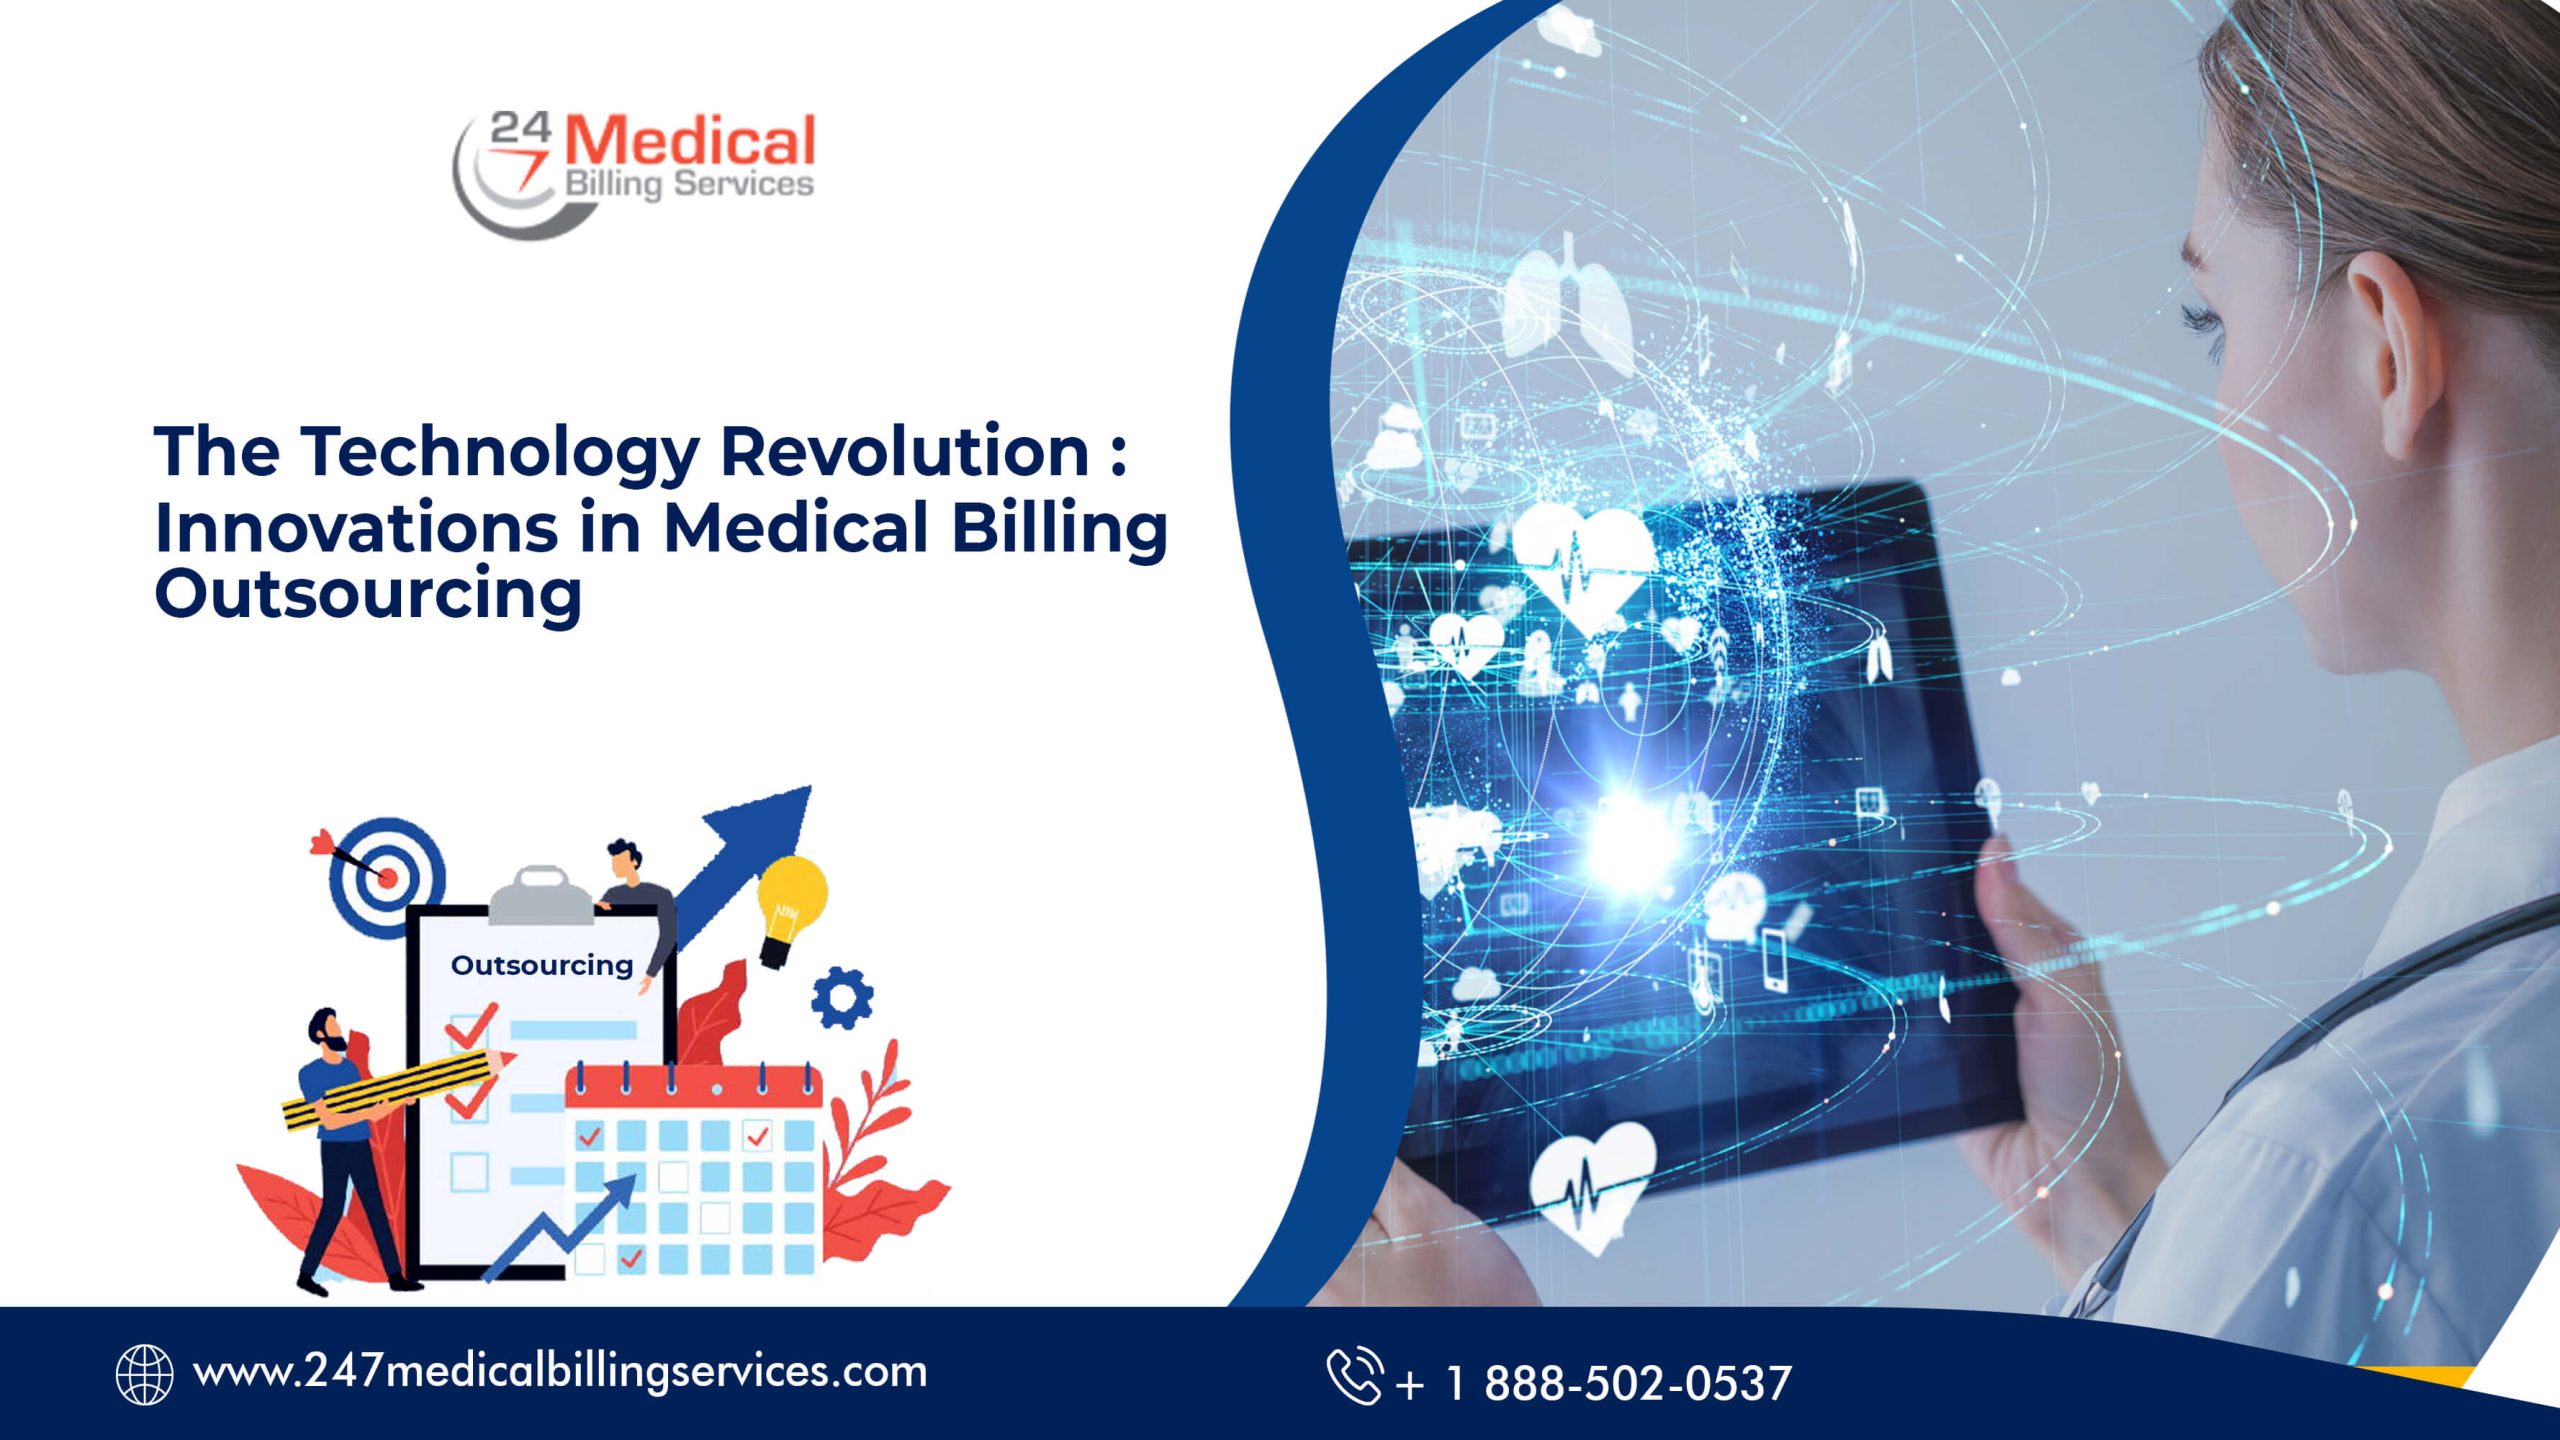  The Technology Revolution: Innovations in Medical Billing Outsourcing